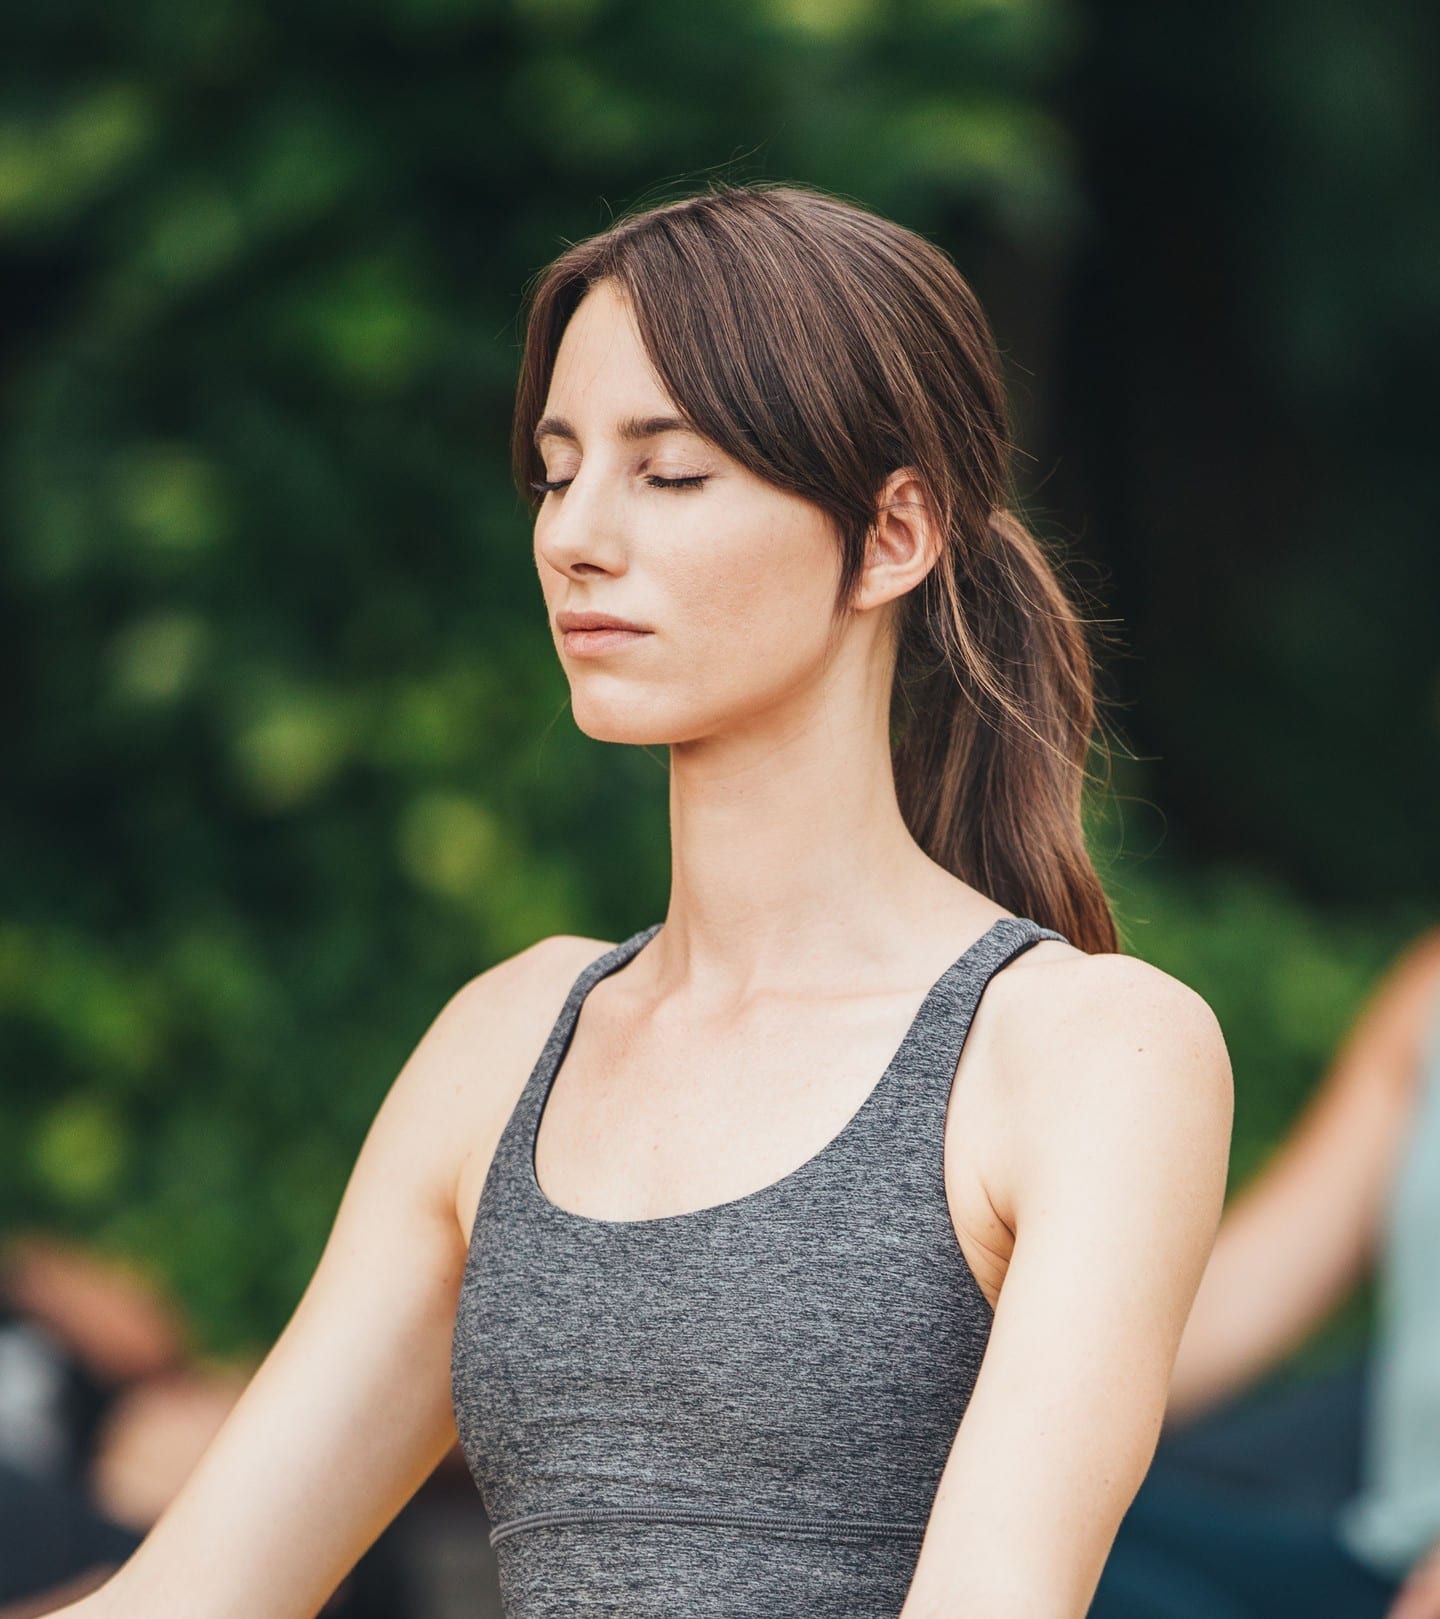 Join @corepoweryoga in the IBM Courtyard every Wednesday from 5pm - 6pm for a complimentary Yoga Sculpt class! Head to the link in our bio to learn more and sign up.